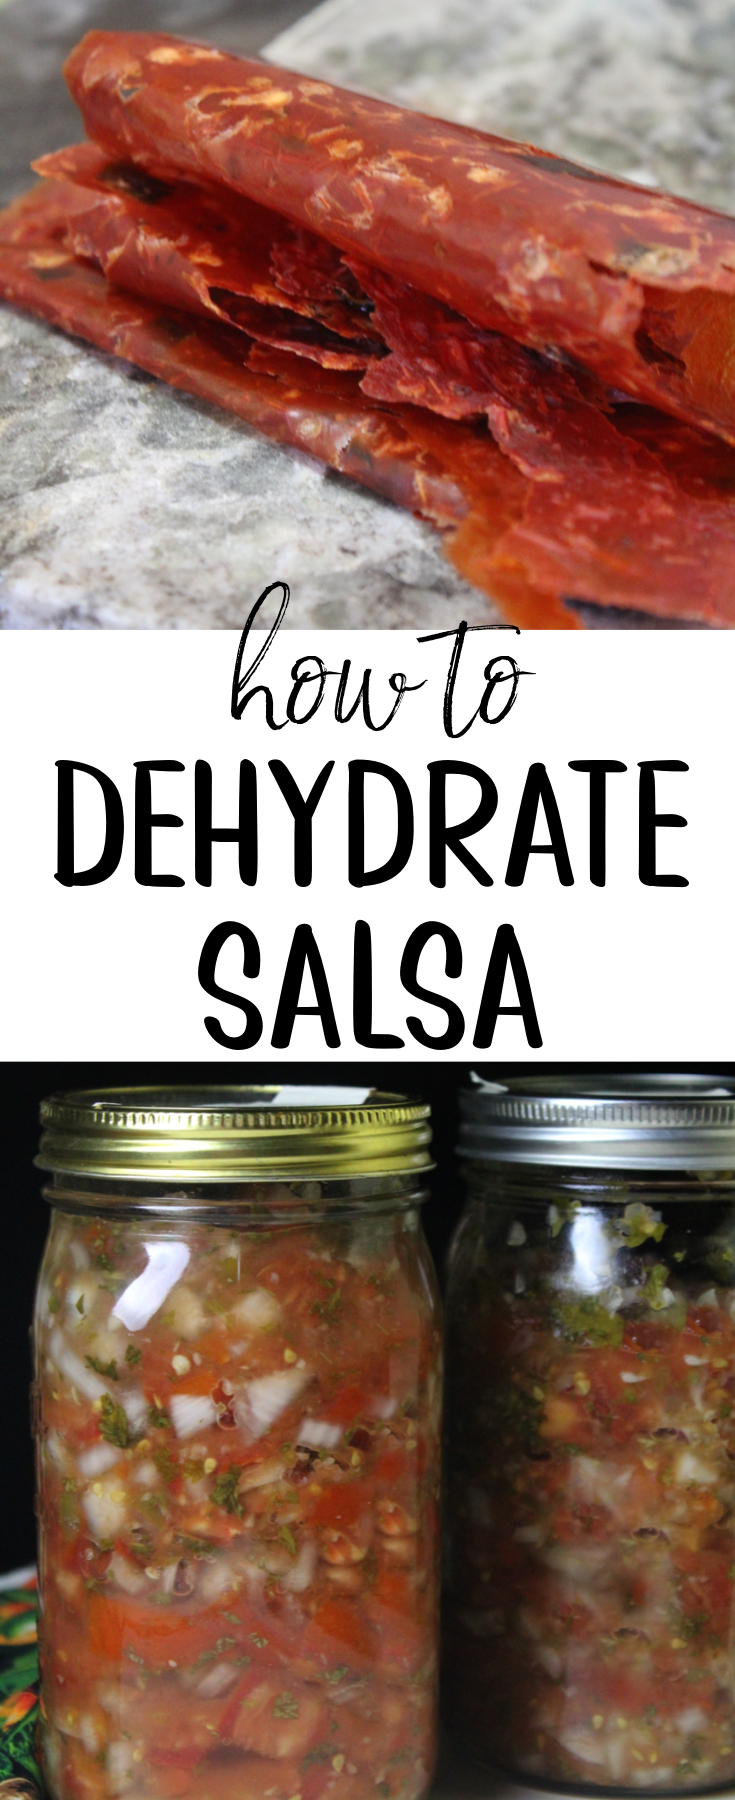 Step-by-step directions to help you learn how to dehydrate salsa to prep your pantry or, to enjoy on your next hike out on the trail.  Dehydrated salsa makes great trail food!